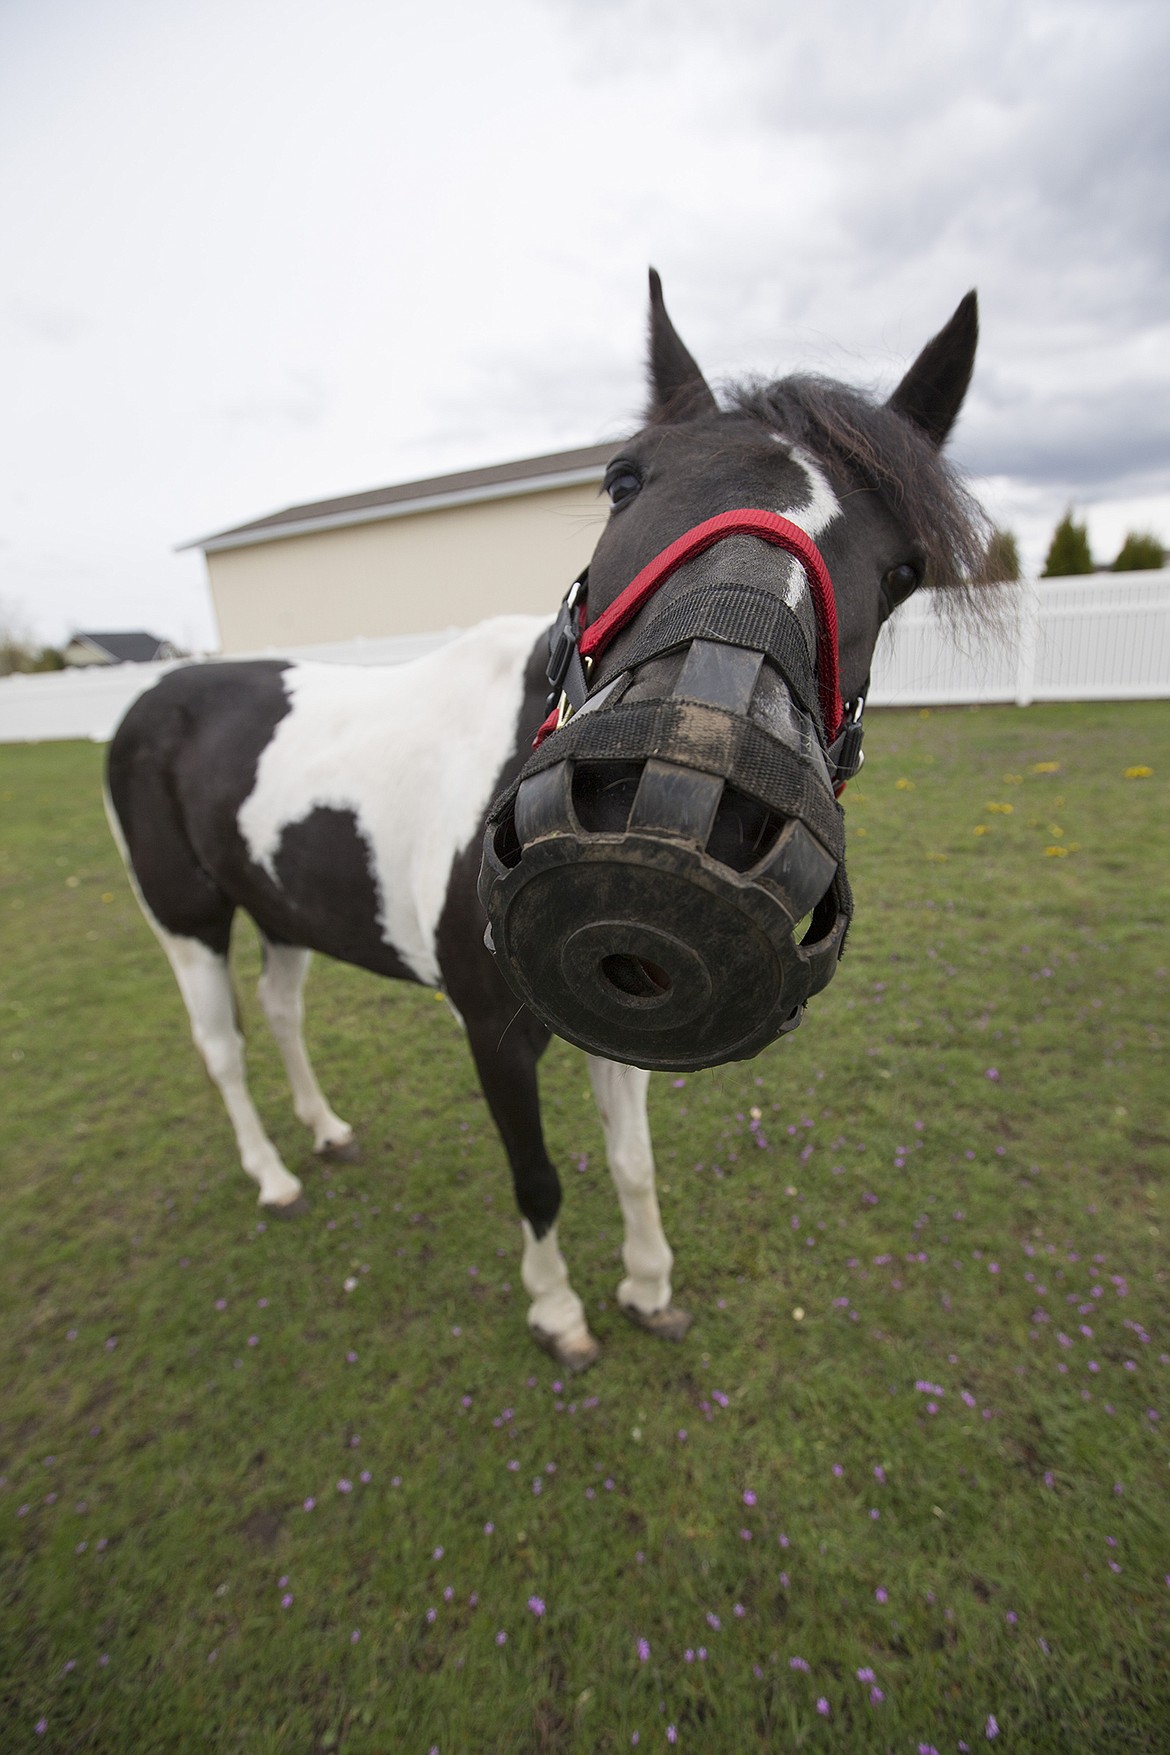 LISA JAMES/Press
Sundae has to wear a muzzle outside of the barn to keep her from eating the grass, which has too much sugar and aggrivates her laminitis, a condition that inflames the tissue in her hooves which are already damaged from neglect. The pony was rescued from a field where it was being kept in Post Falls this past winter. Malnourished and weak, she was described her as &quot;within days of death&quot;. As a result of the reported neglect, Sundae's hooves have grown thick and spread out which has caused her ankles to buckle, making it difficult for her to walk.